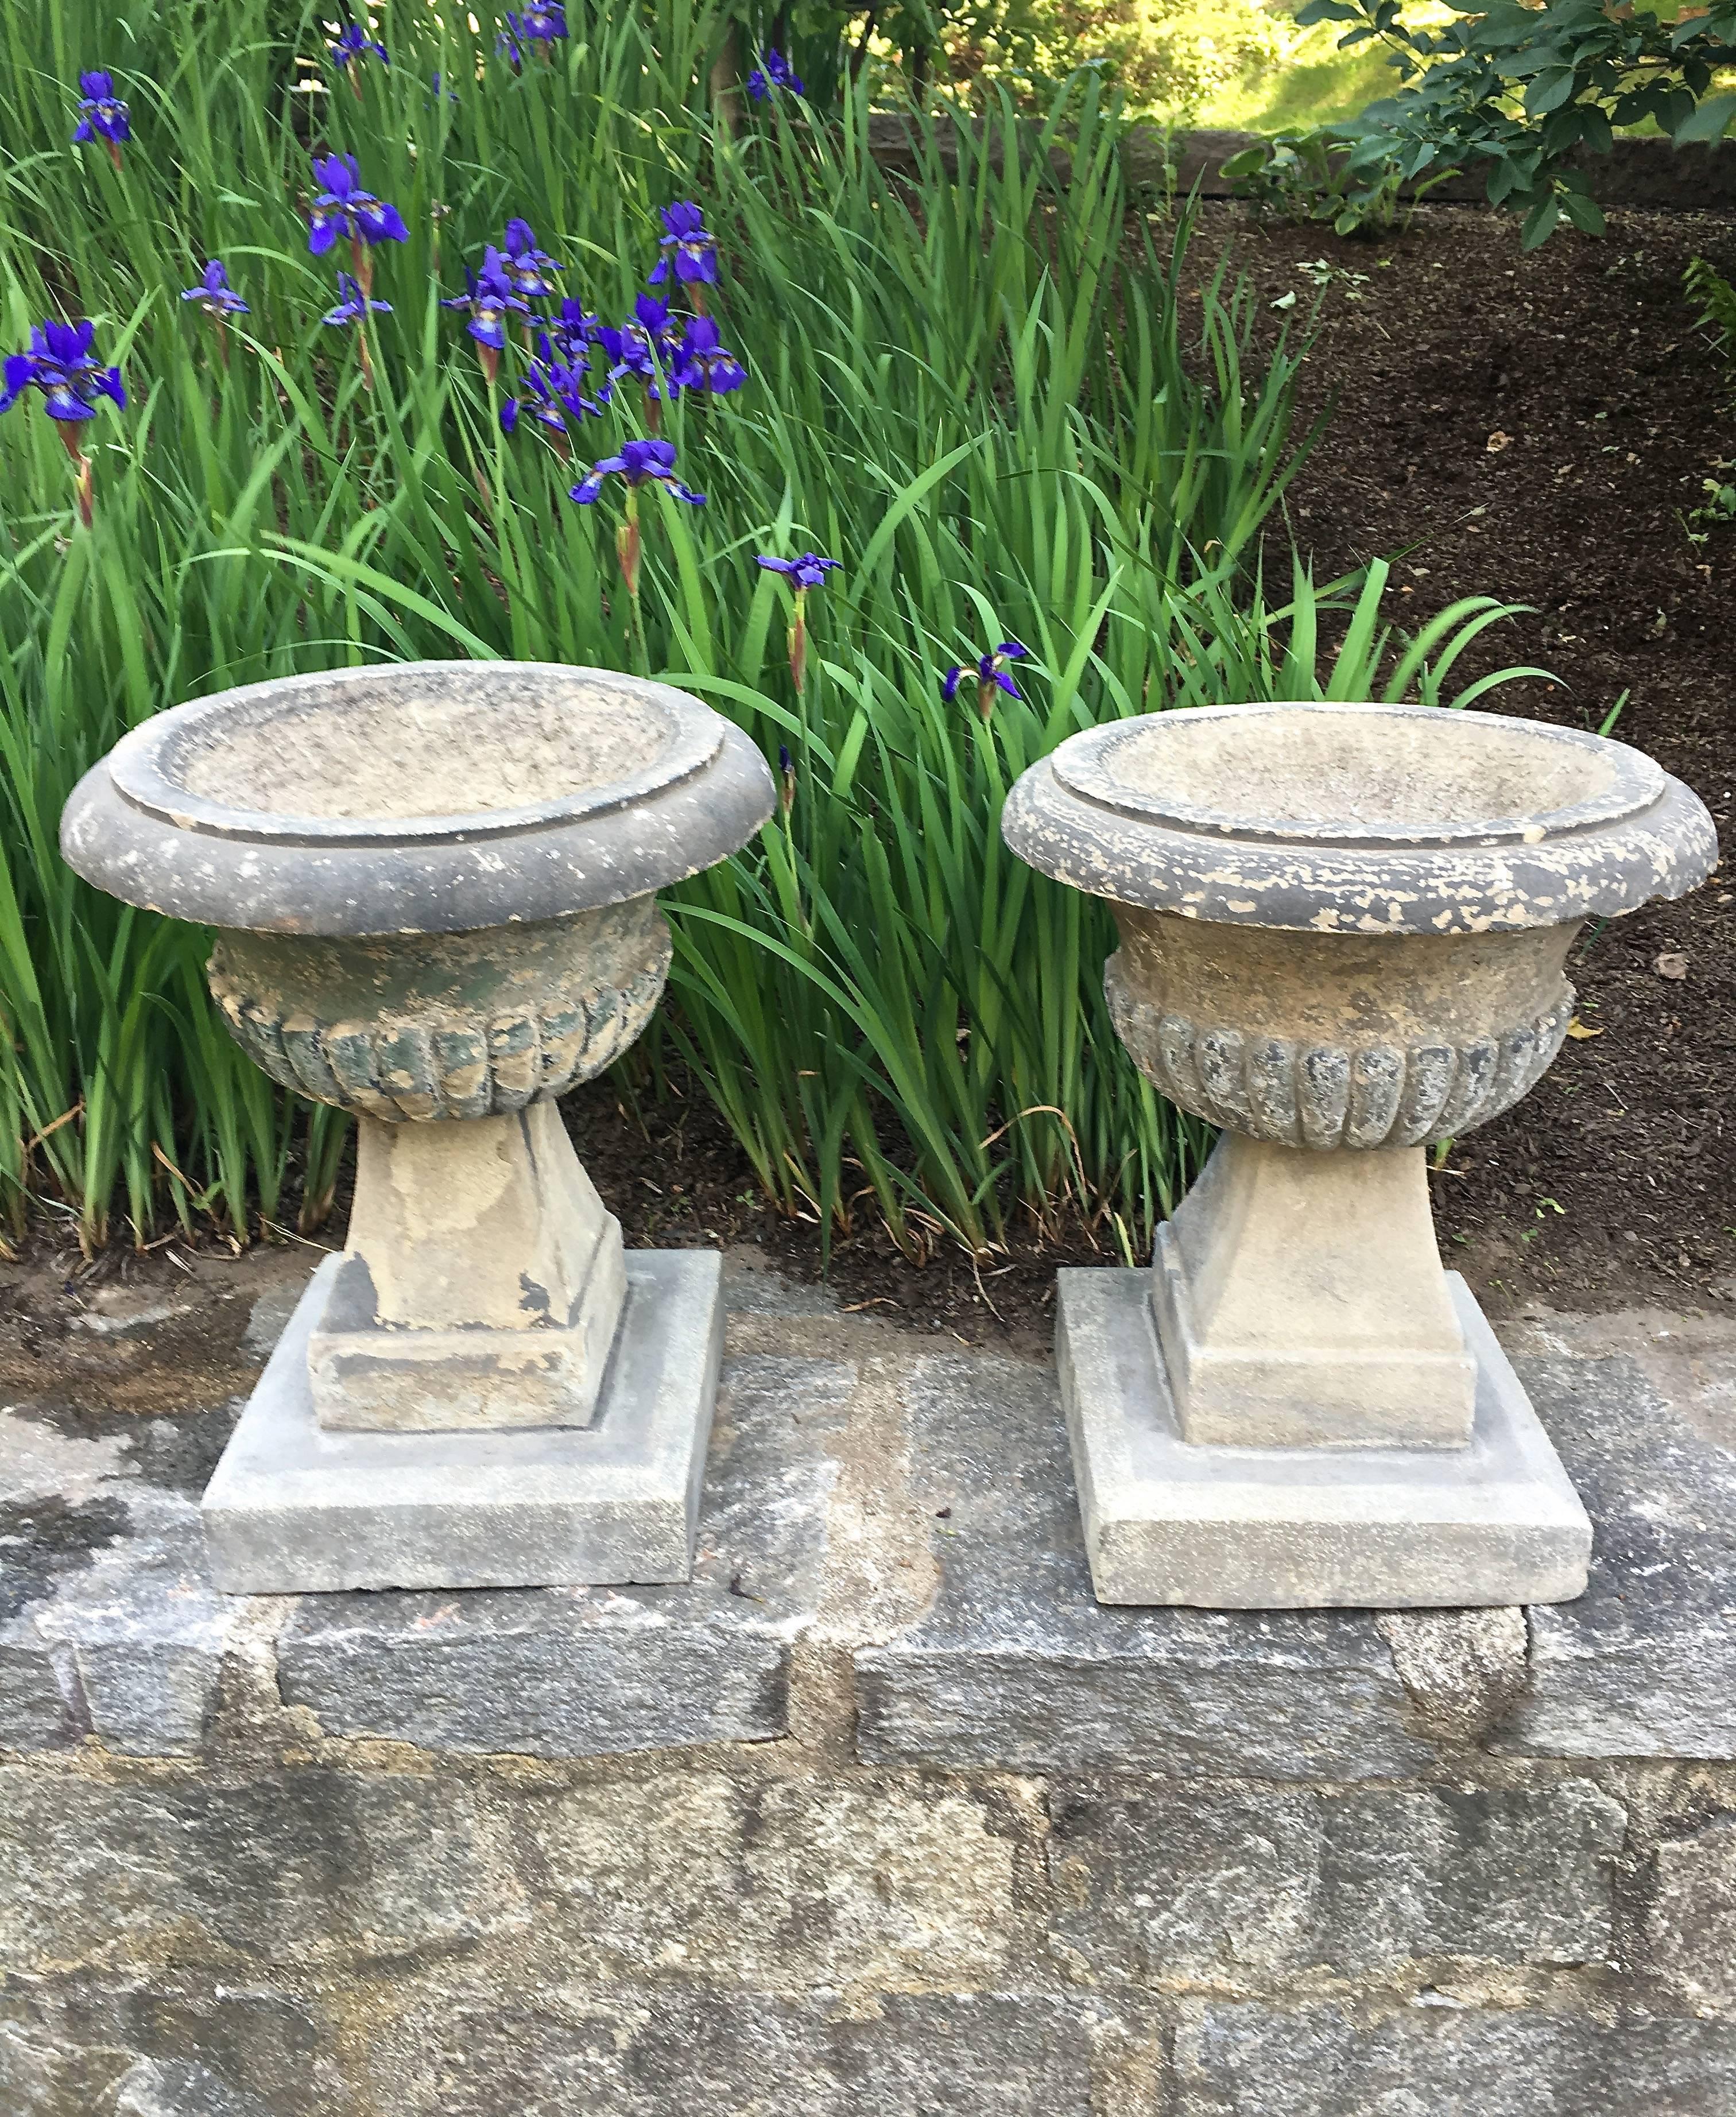 This pair of hand-carved rustic Yorkstone urns features unusual semi-lobed bowls that are a cross between tazza and campana forms. With faint traces of old green paint, they would make a wonderful addition to your informal country garden and will